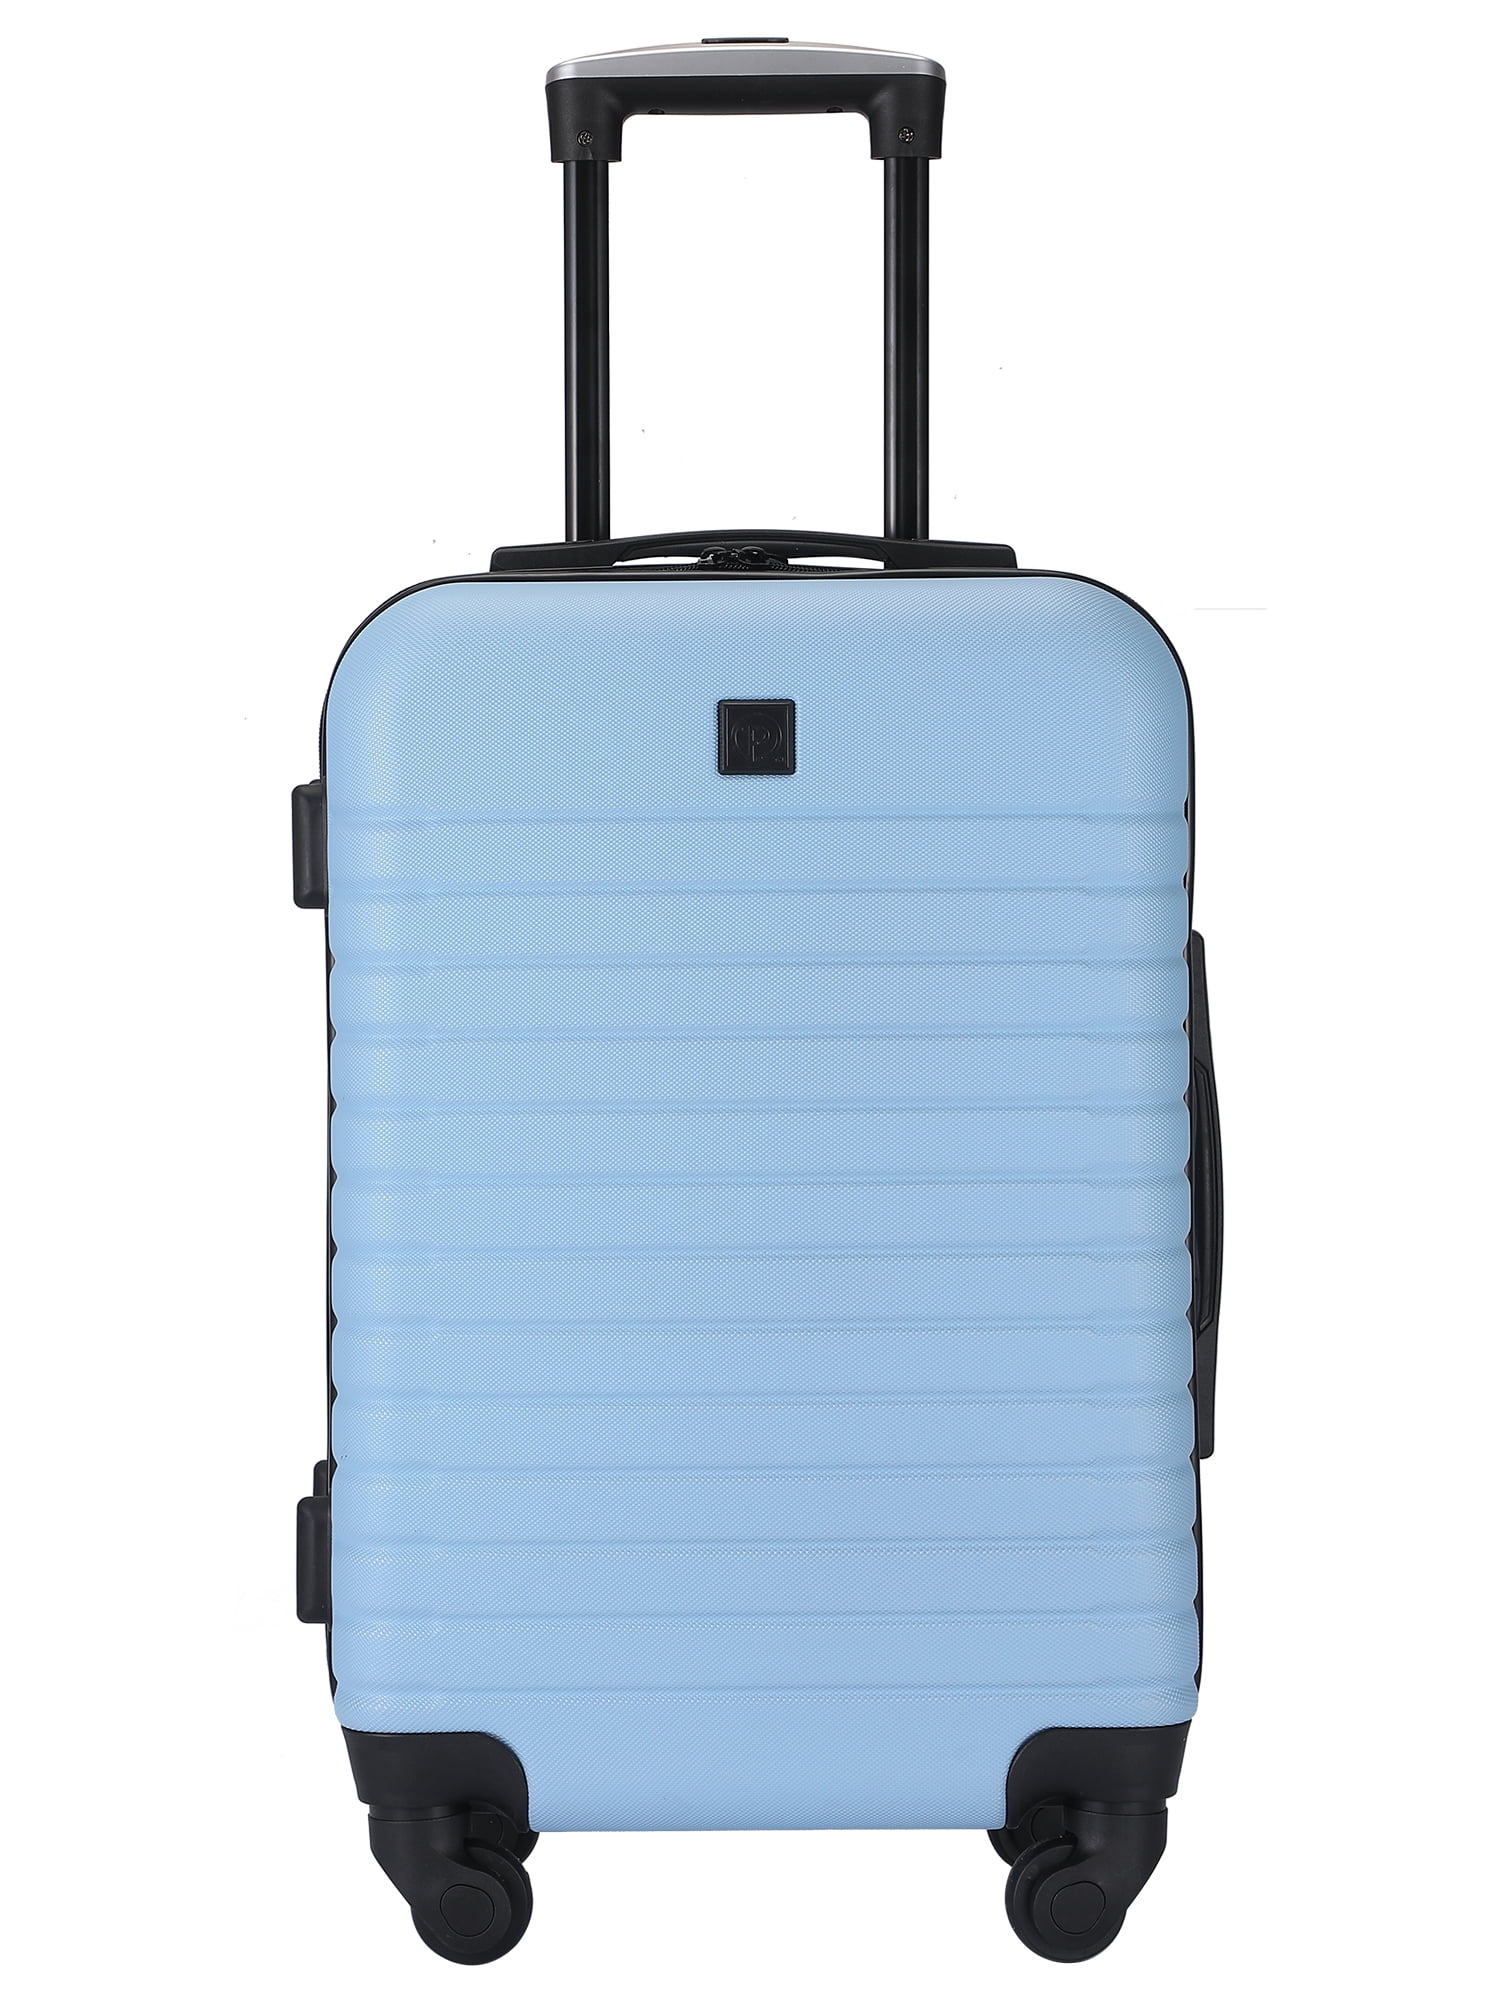 Terminal 2 Expandable Carry-On Luggage